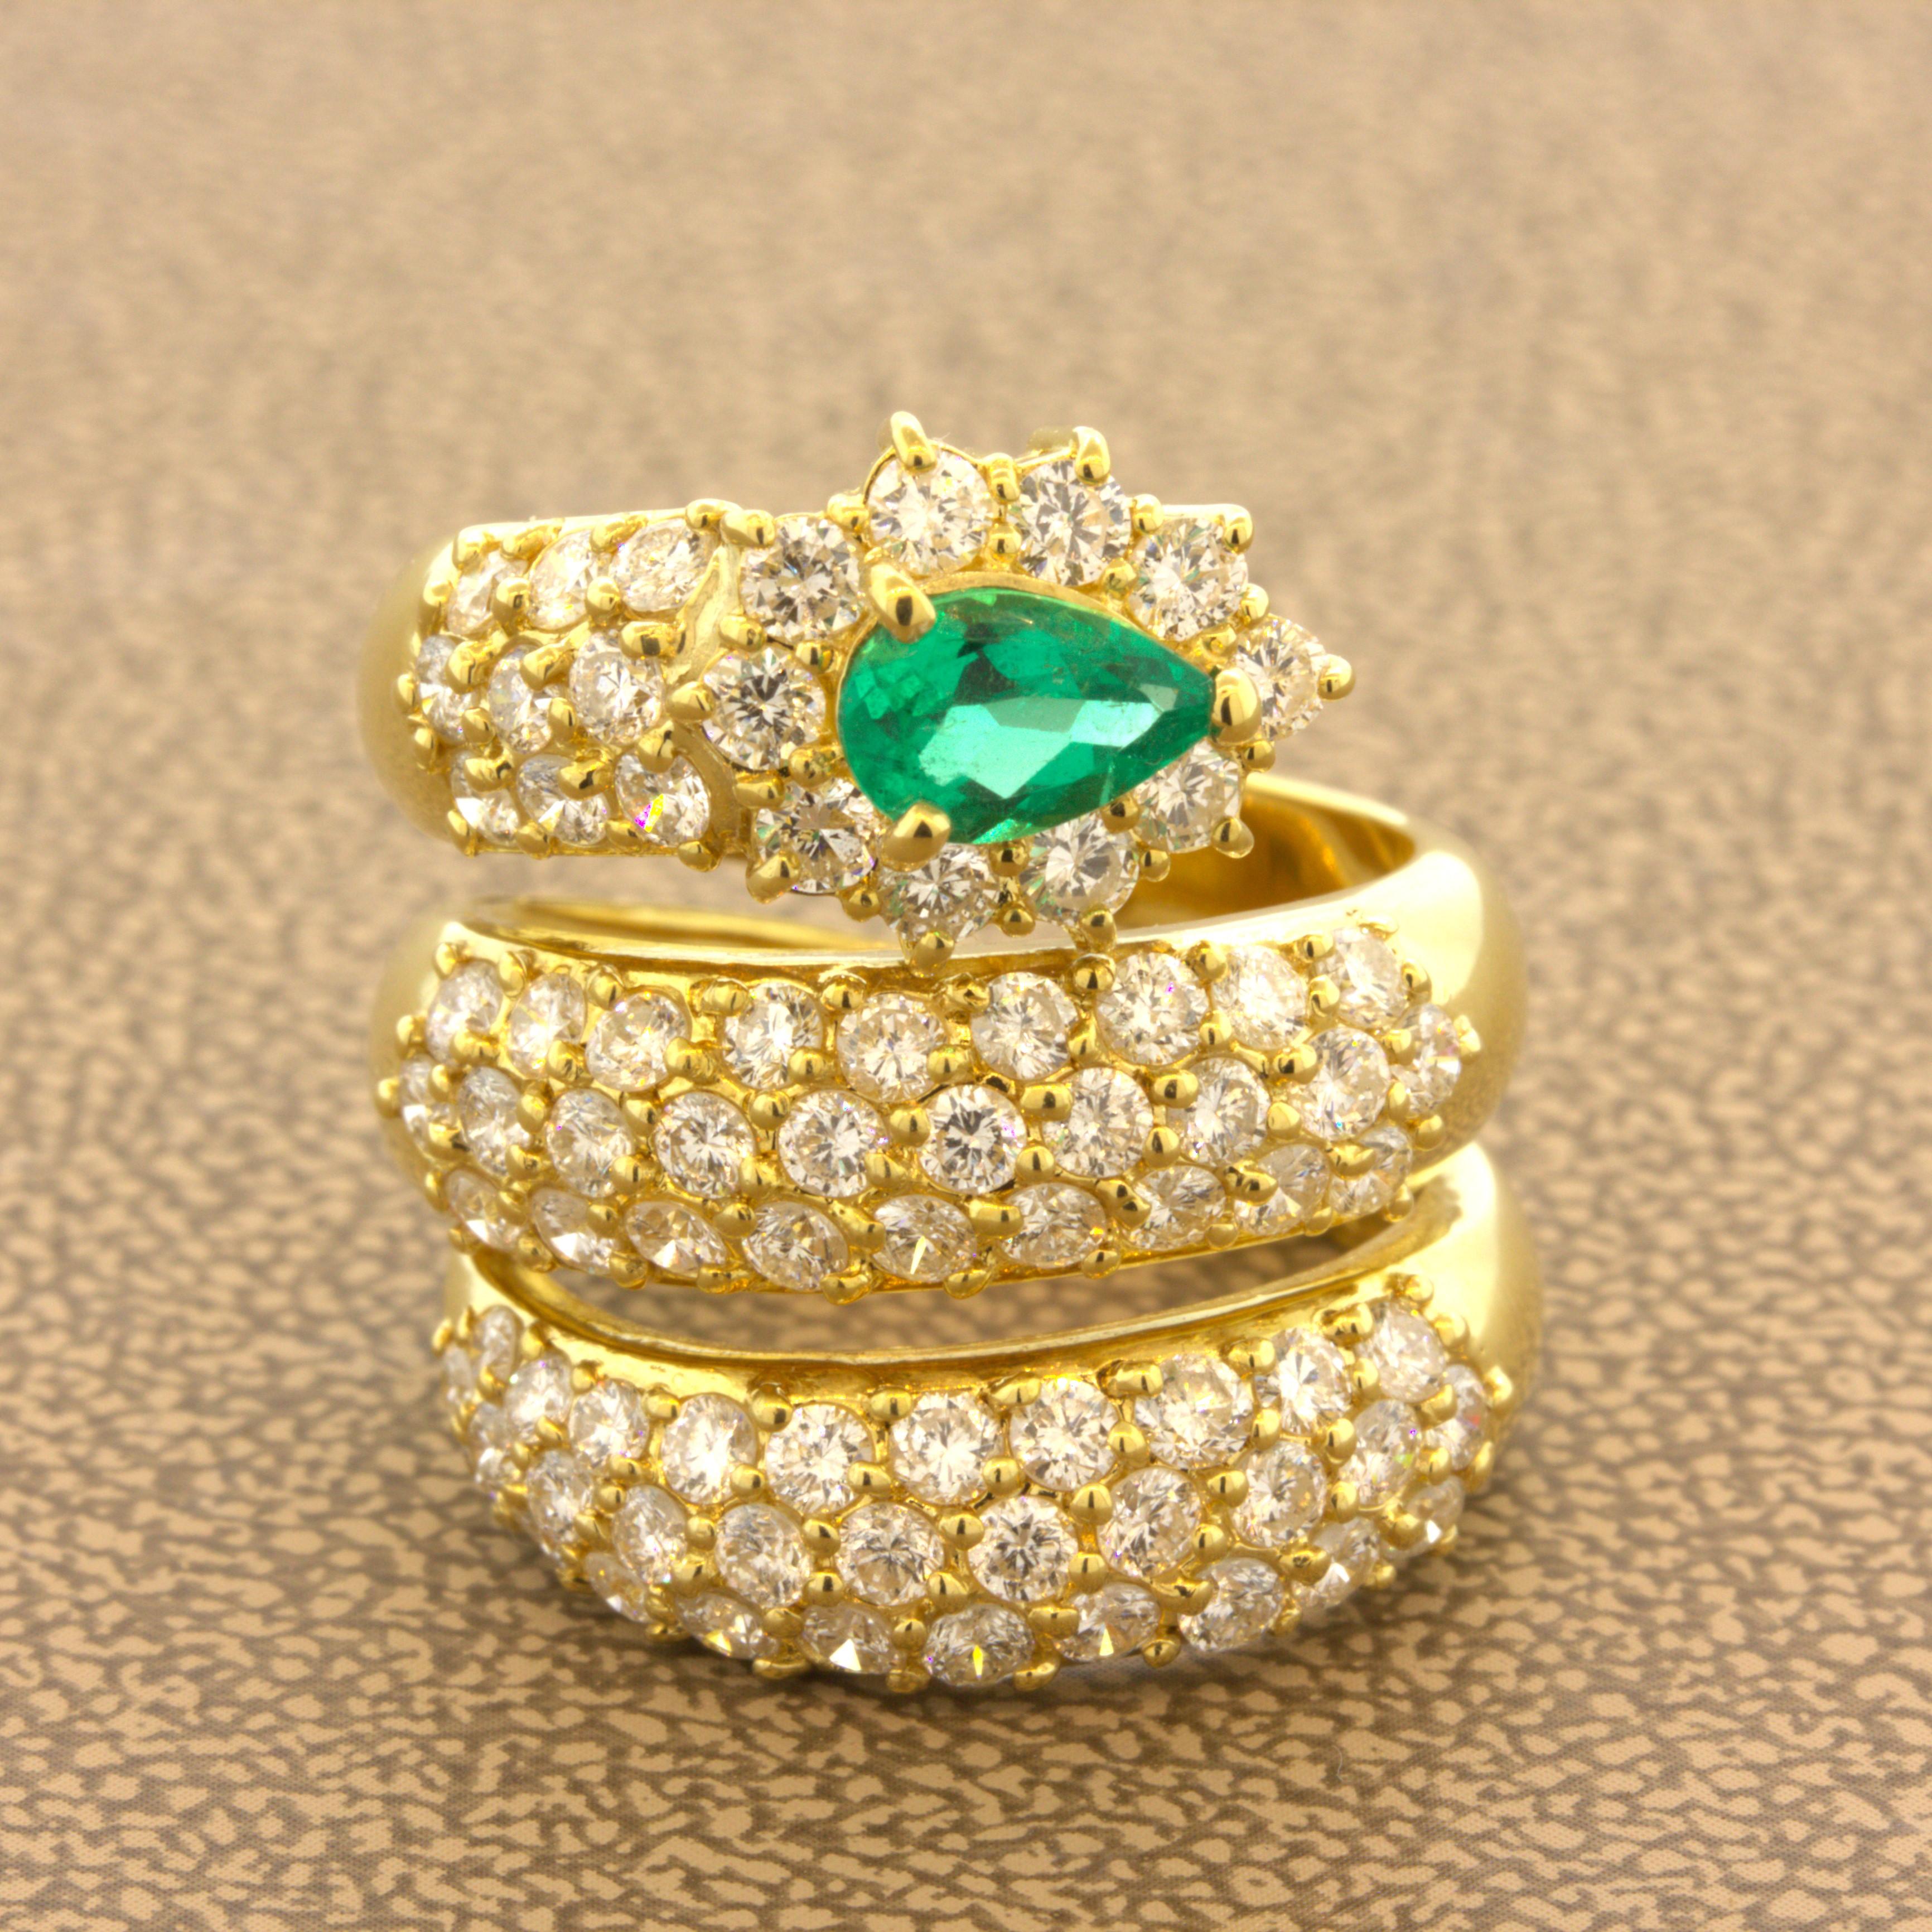 Emerald Diamond 18k Yellow Gold Snake Ring

A sleek and stylish ring featuring fine gems set in 18k yellow gold. The head of the ring is set with a 0.51 carat pear-shape emerald with strong vivid grass green color. The body of the piece is blanketed